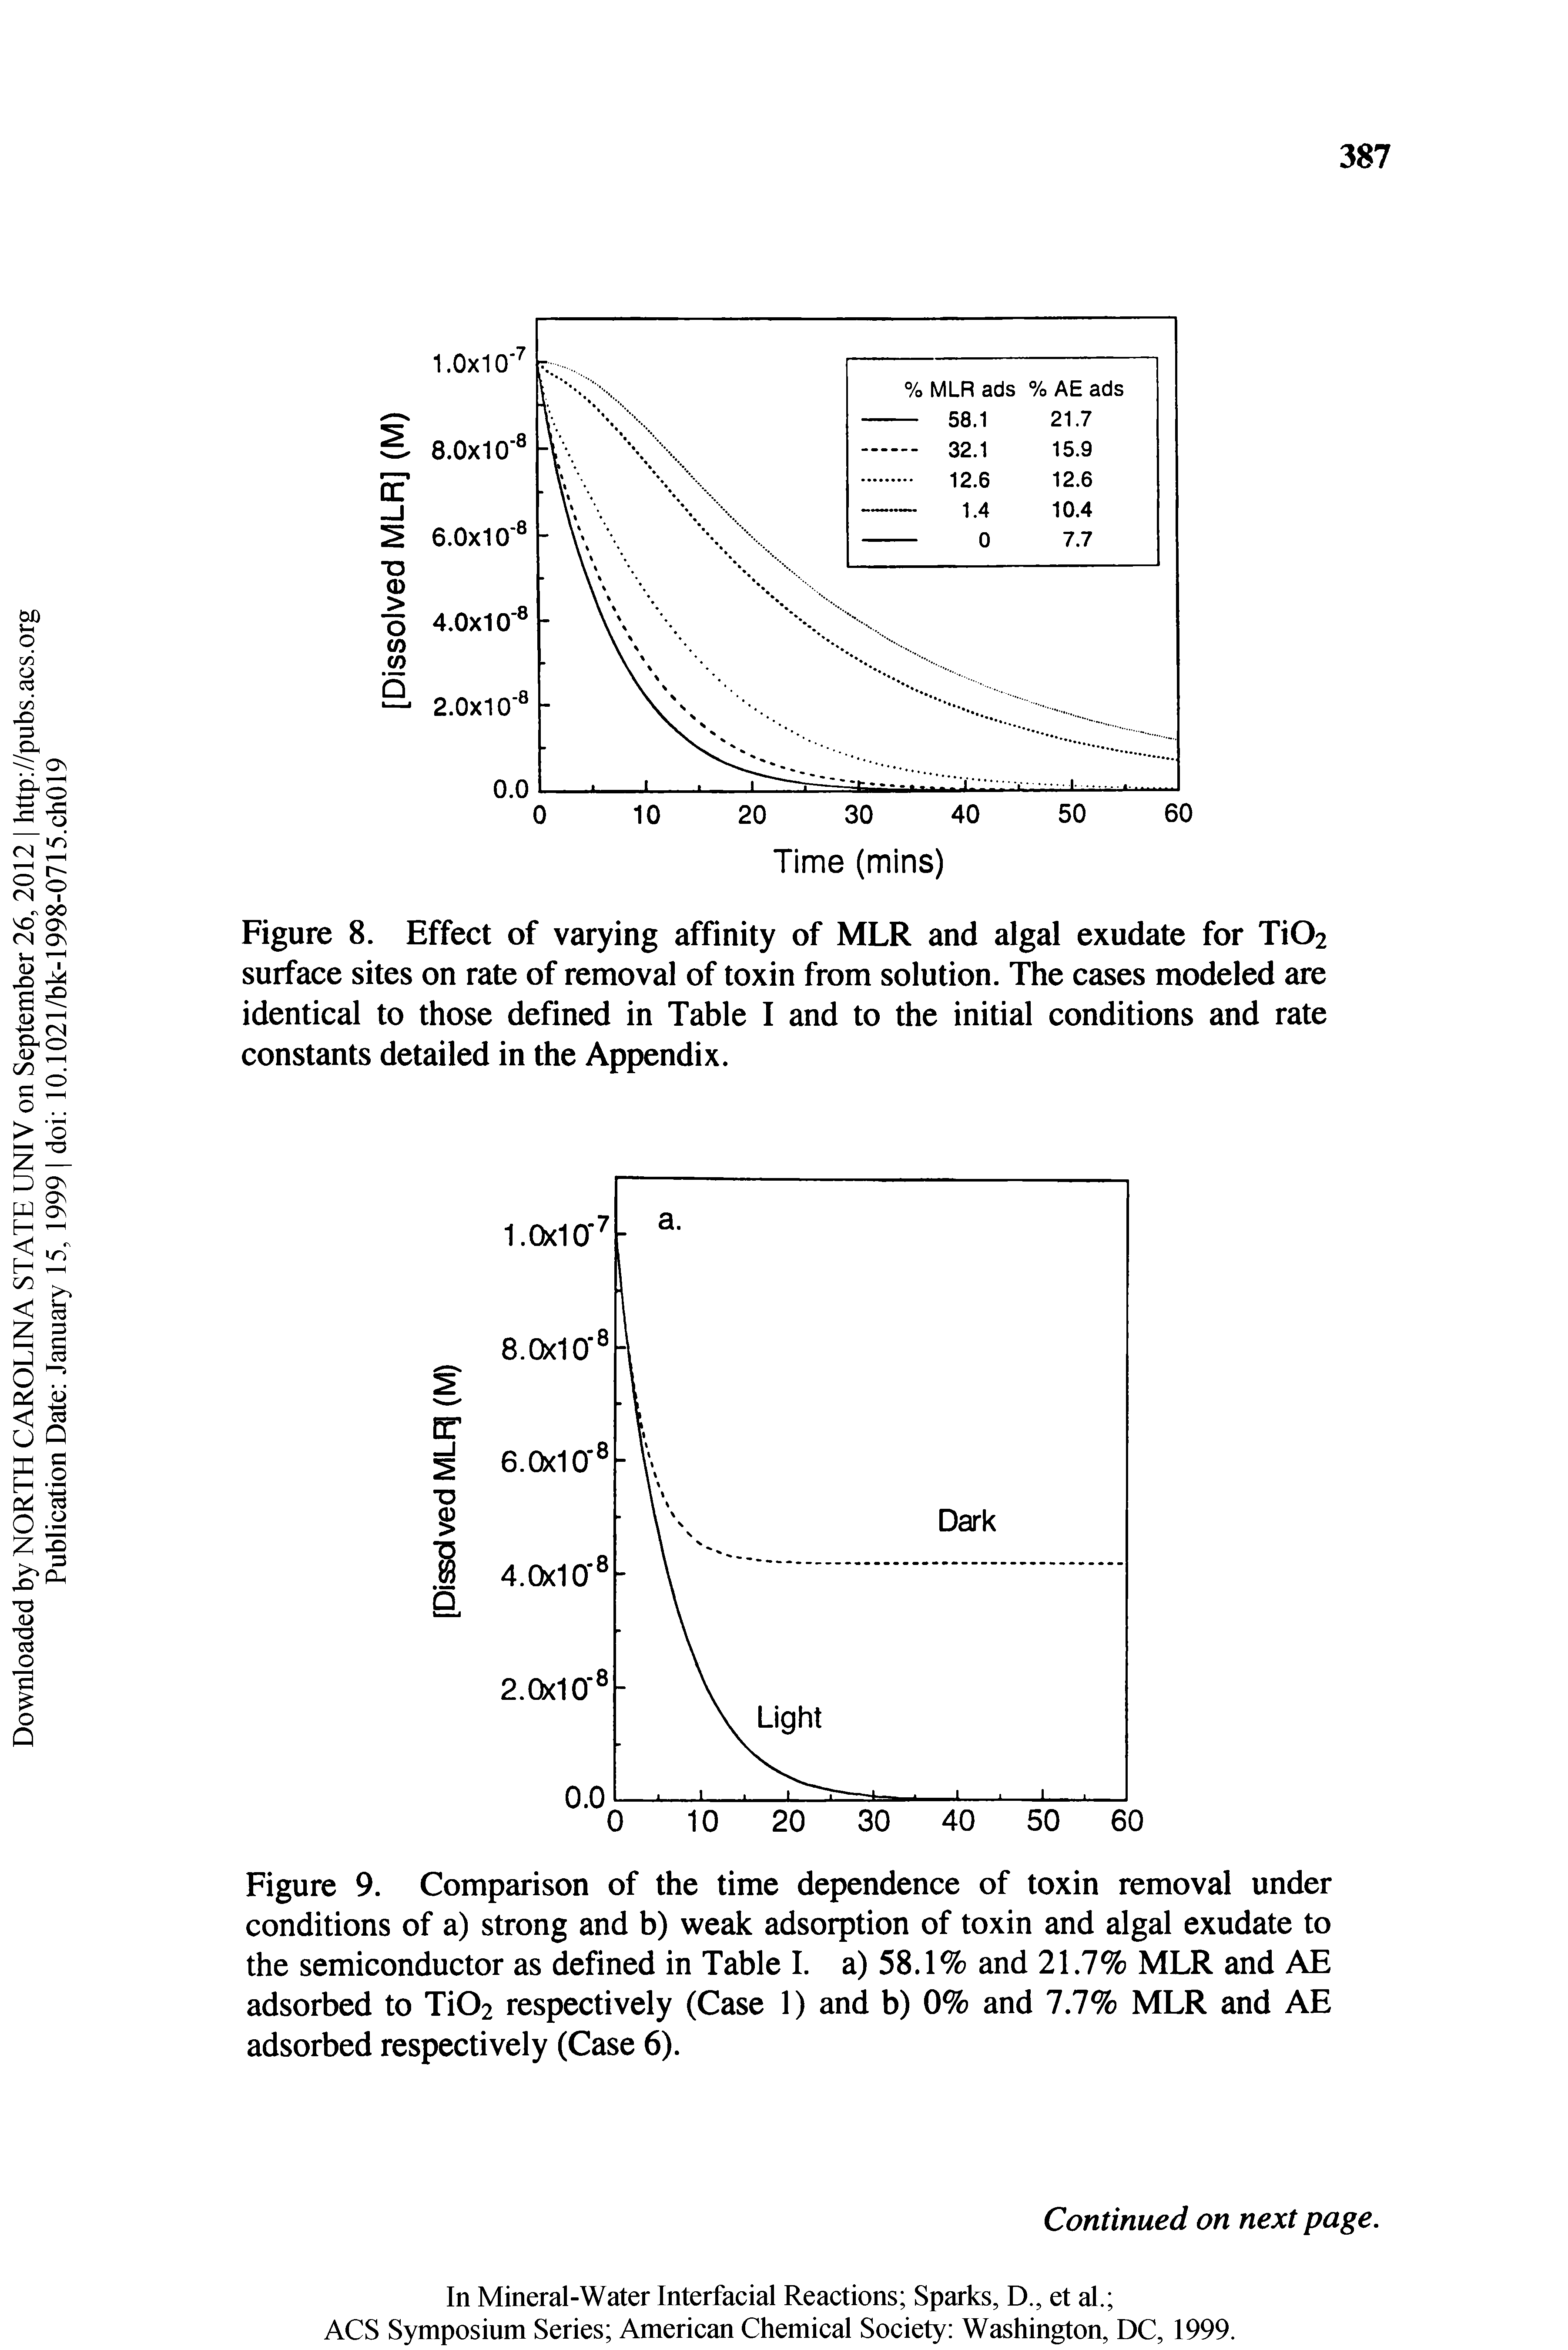 Figure 8. Effect of varying affinity of MLR and algal exudate for Ti02 surface sites on rate of removal of toxin from solution. The cases modeled are identical to those defined in Table I and to the initial conditions and rate constants detailed in the Appendix.